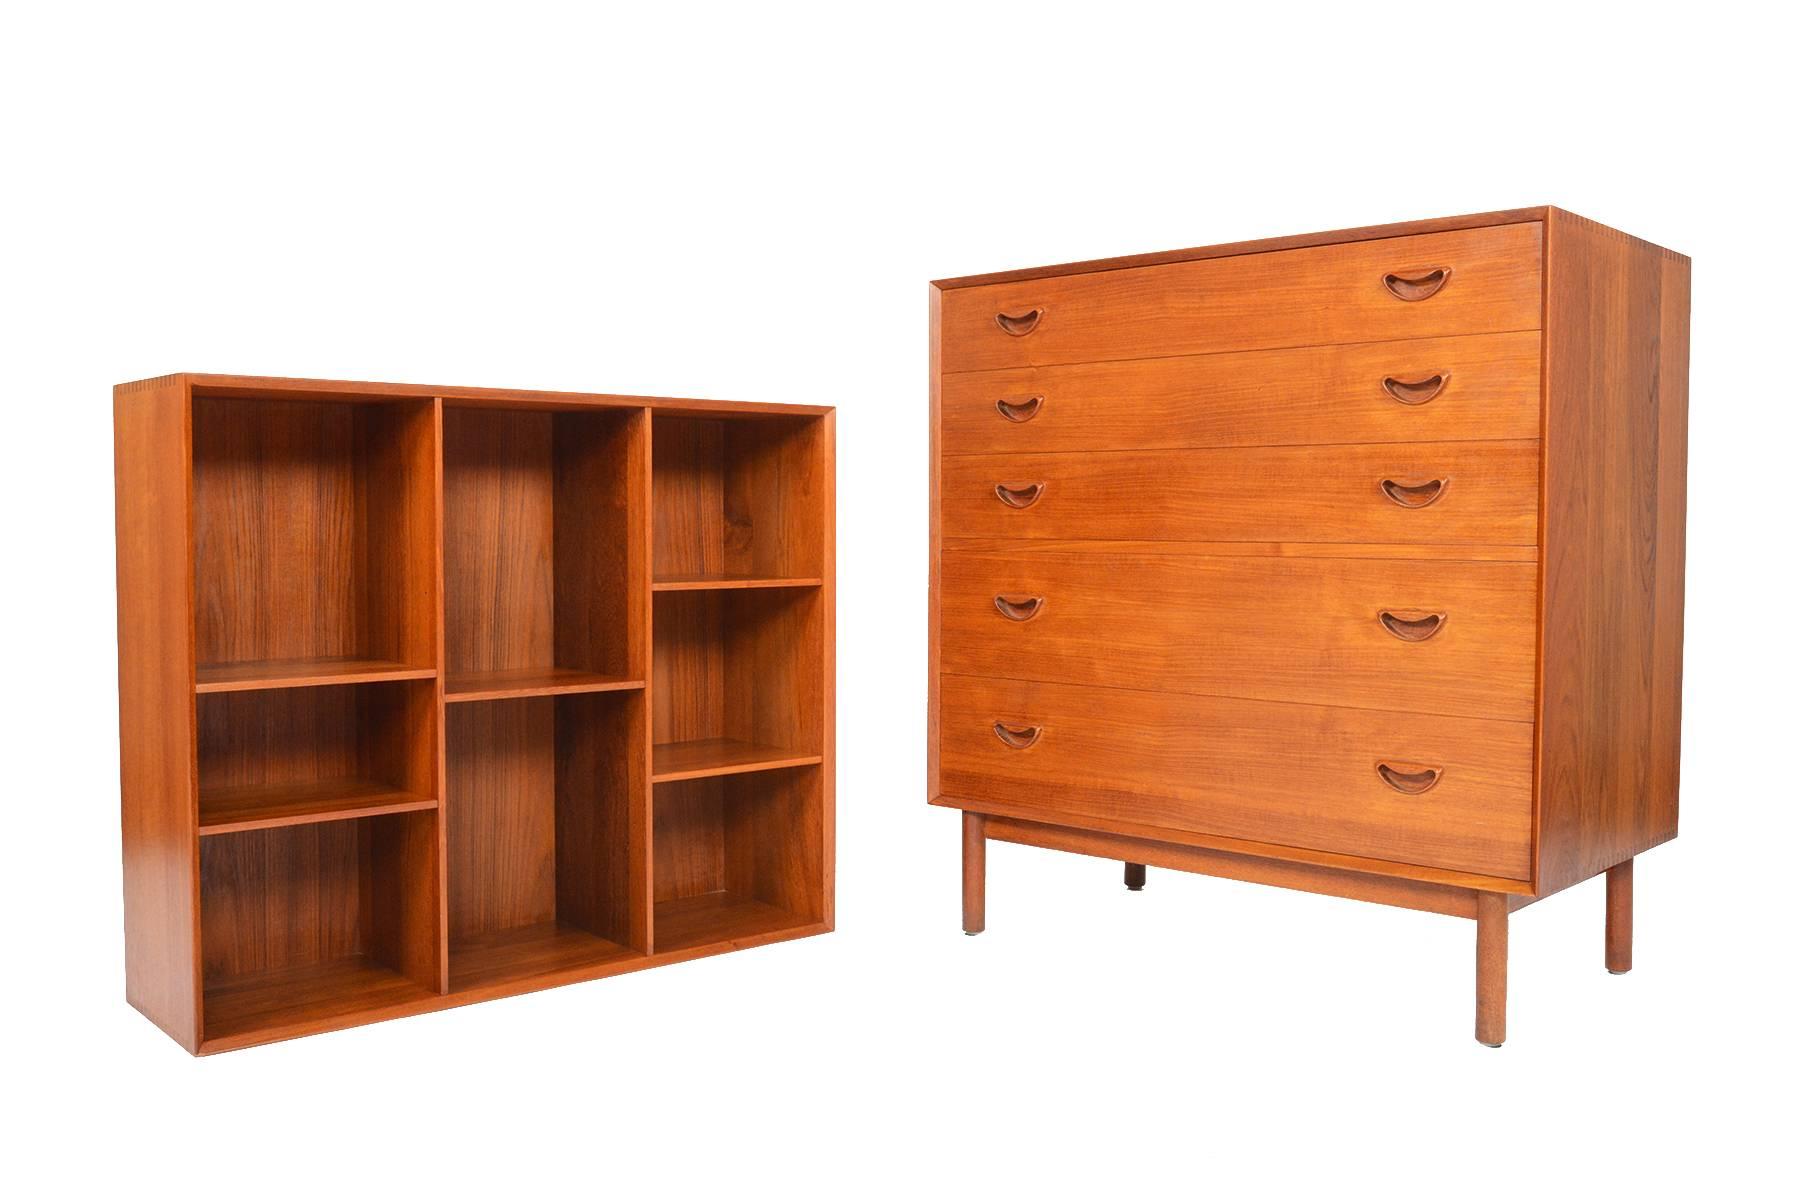 This Danish modern Mid-Century dresser with bookcase hutch was designed by Peter Hvidt and manufactured by Søborg Møbelfabrik and is a versatile storage piece for any modern home! With excellent craftsmanship throughout, Hvidt's signature solid teak